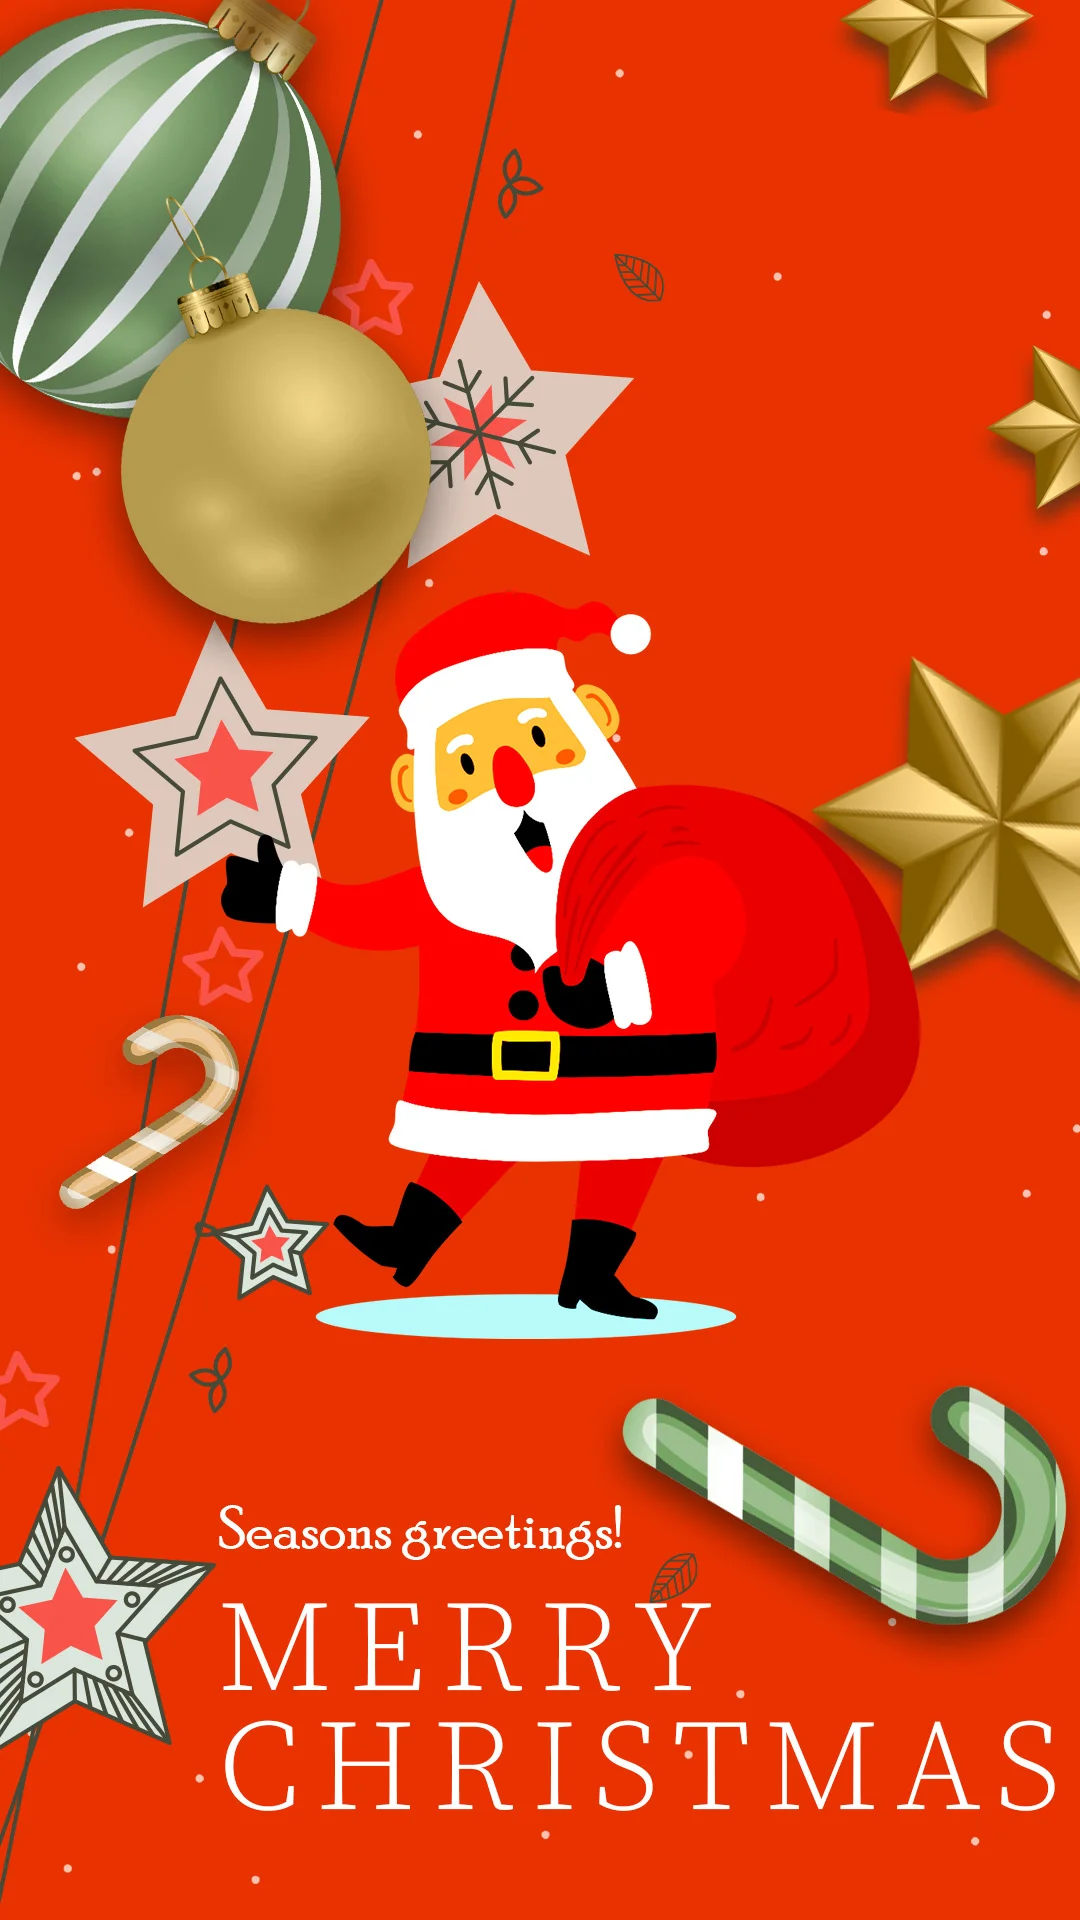 merry Christmas post design thin font with Santa Claus